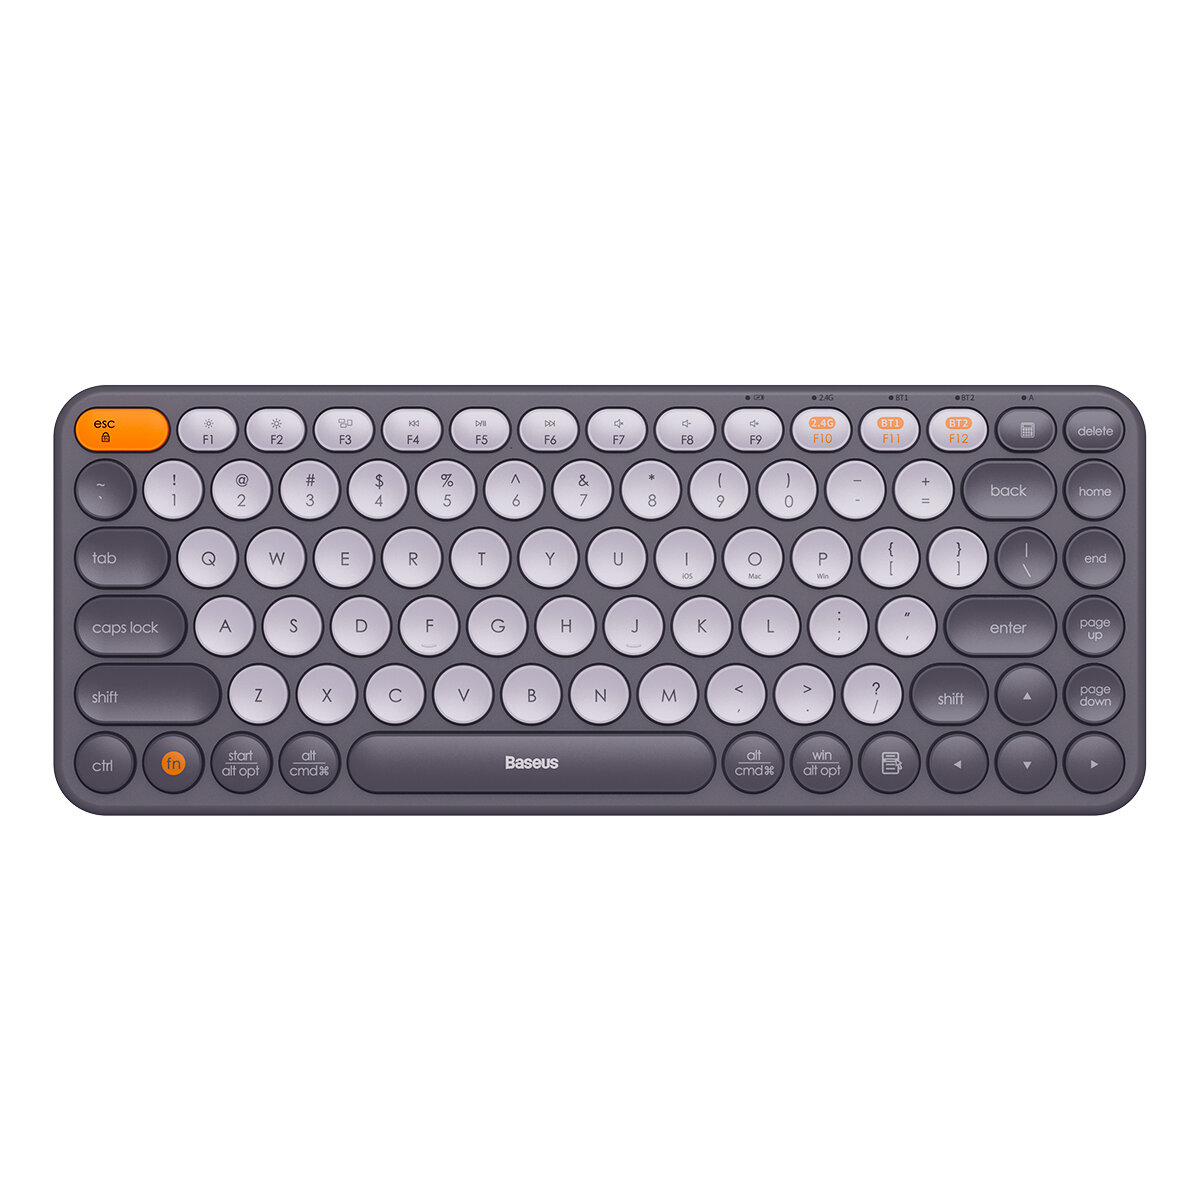 Baseus Bluetooth Wireless Computer Keyboard Multi-Connectionwith High Portability with 2.4GHz USB Nano Receiver Smooth Switch